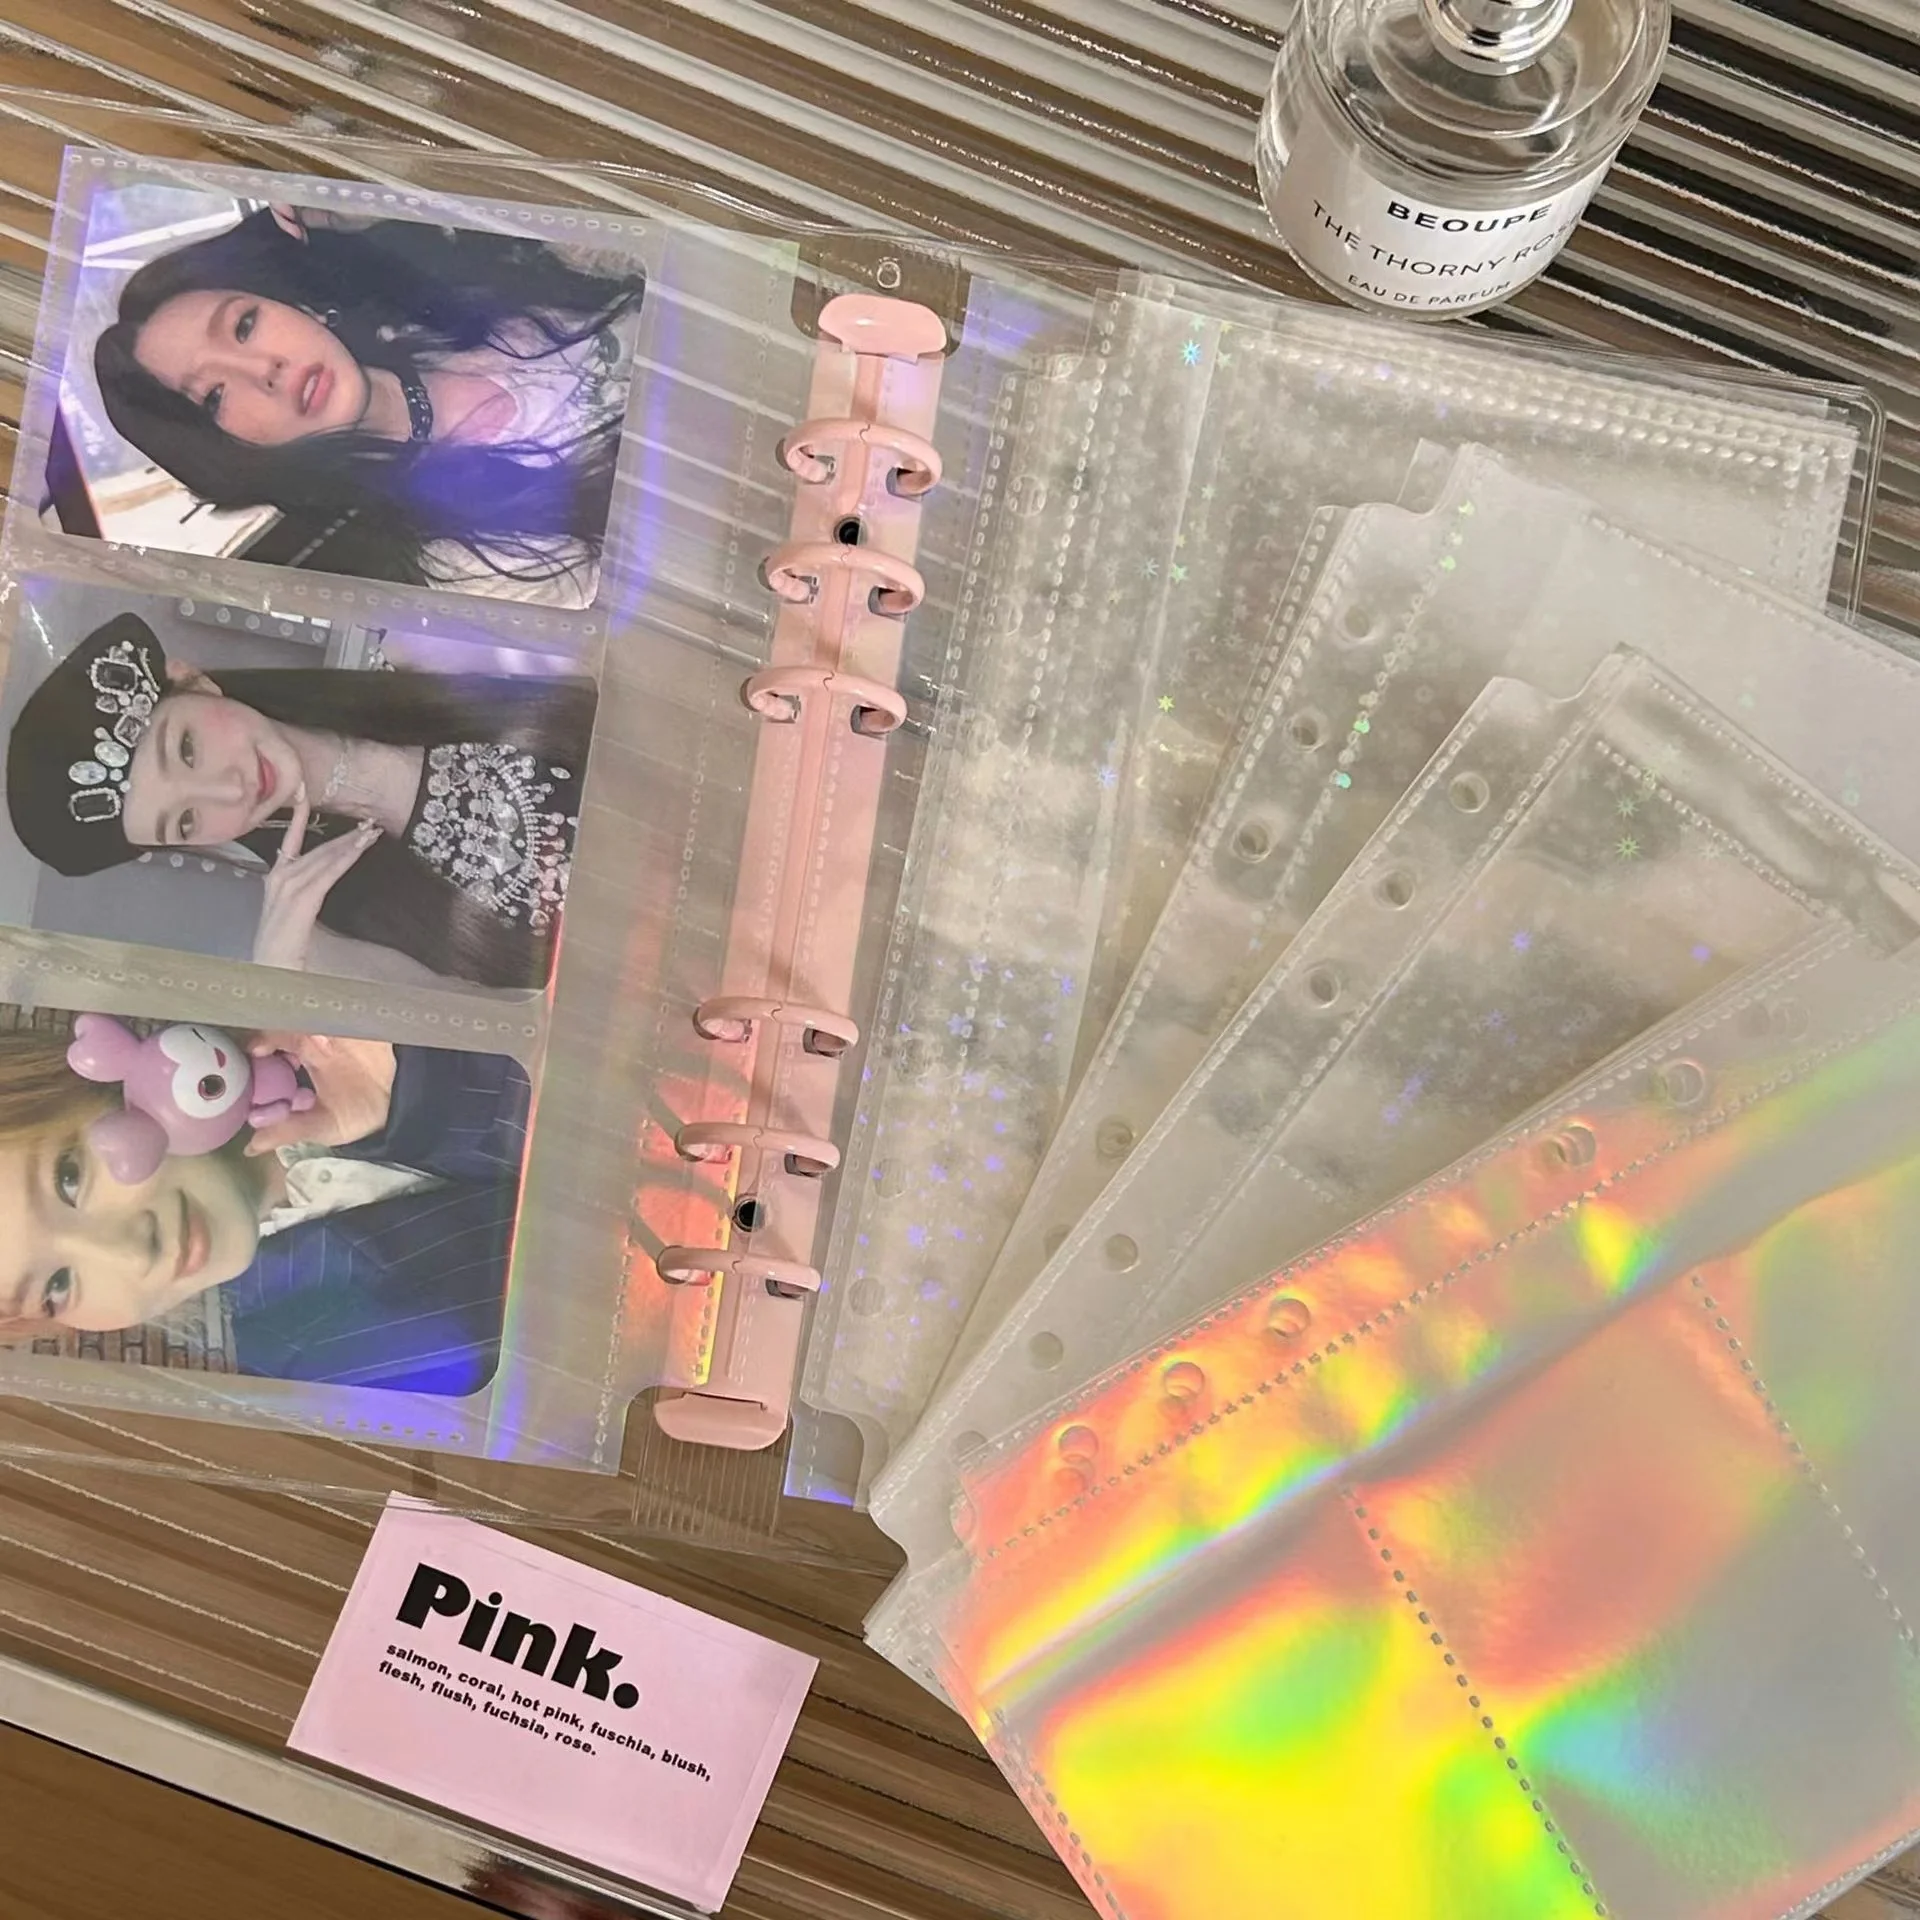 10pcs A6 Binder Photocards Idol Card Kpop Album 3/4/6 inch Refill Sleeves DIY Collect Book Refill Sleeves Storage bag Stationery bag photo storage inner pages binder photocards collect idol sleeves 3 inch photo album kpop photocards binder photo organizer